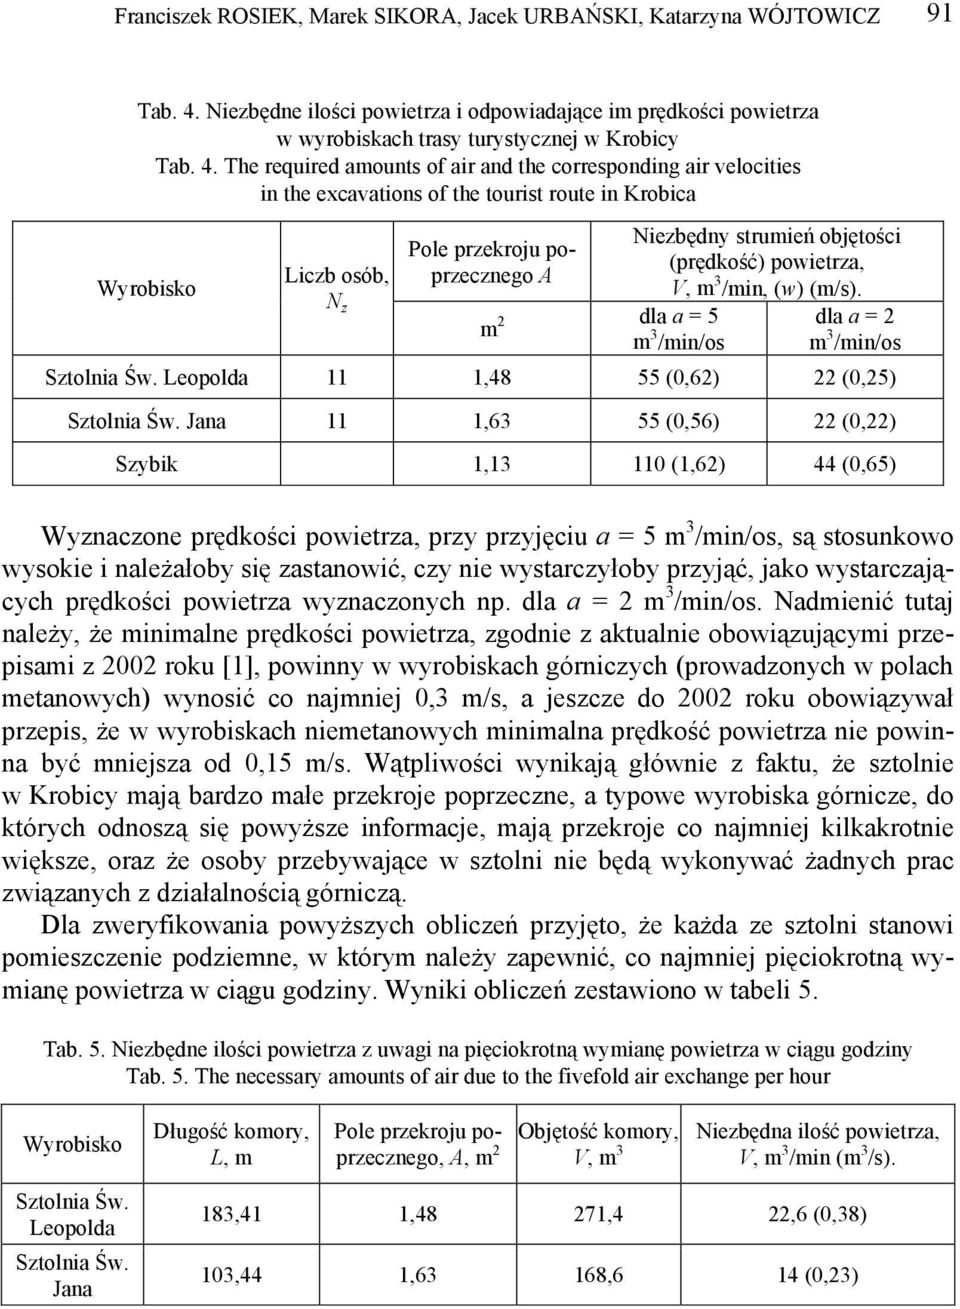 The required amounts of air and the corresponding air velocities in the excavations of the tourist route in Krobica Wyrobisko Liczb osób, N z Pole przekroju poprzecznego A m 2 dla a = 5 m 3 /min/os